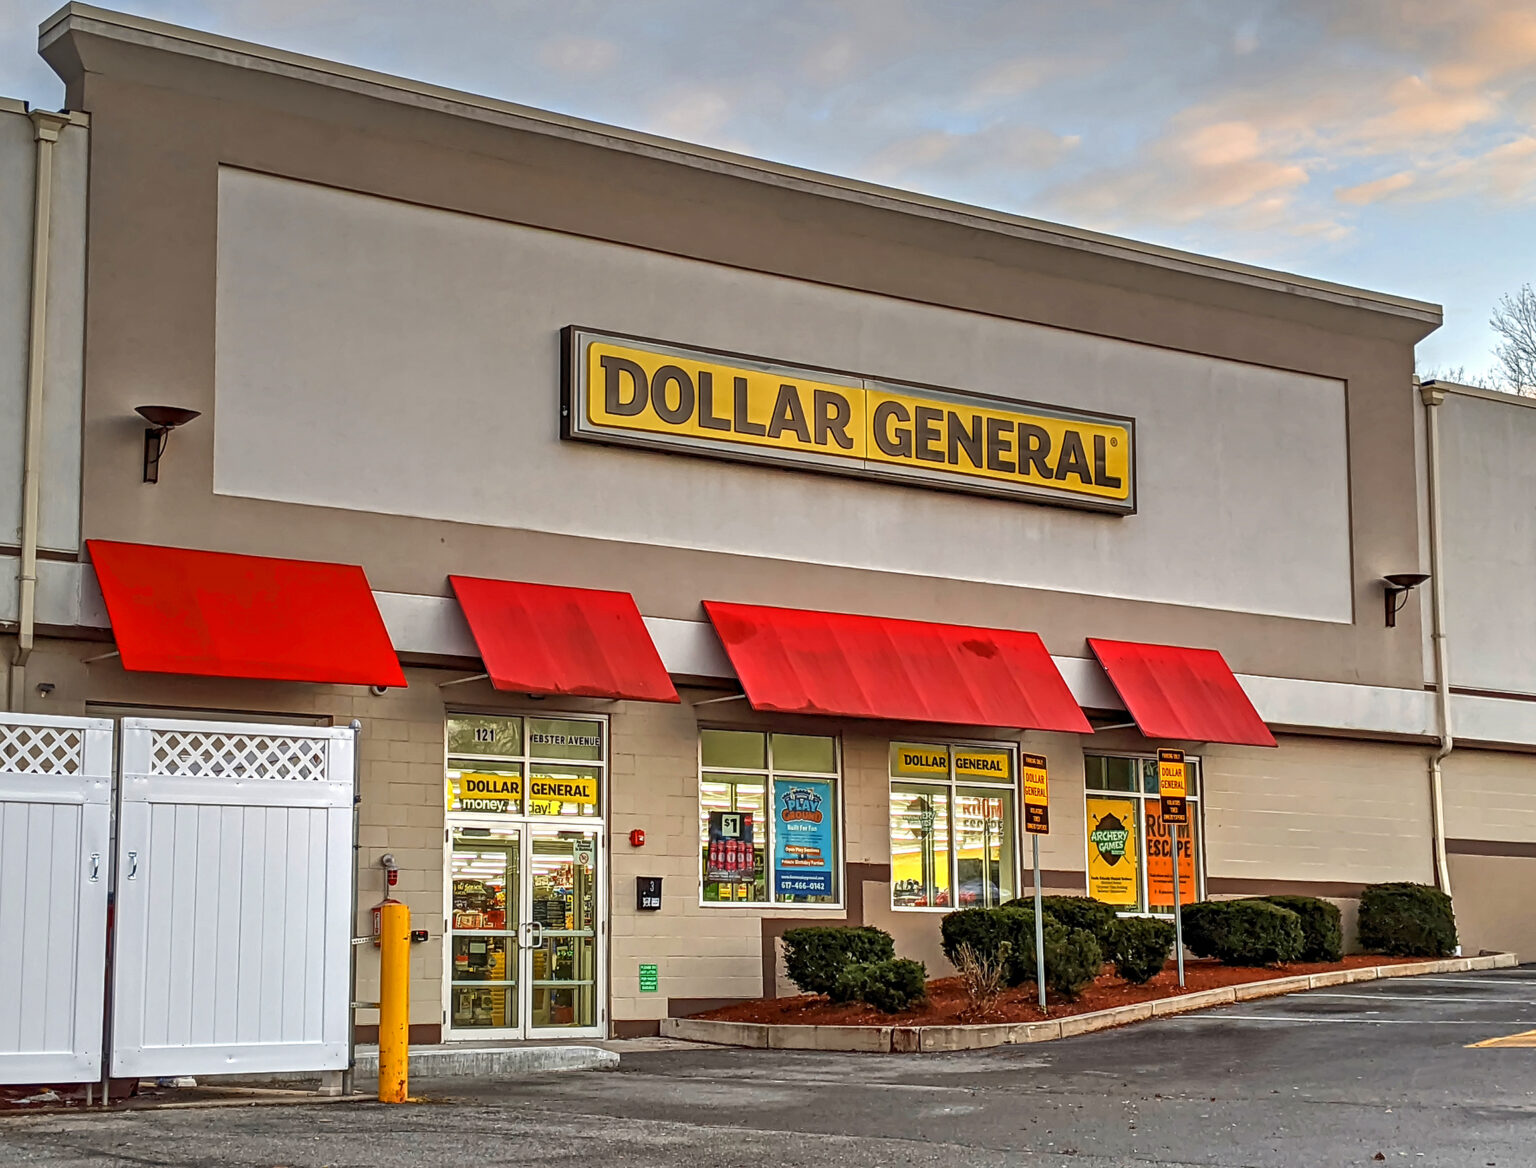 Exterior of a Dollar General store